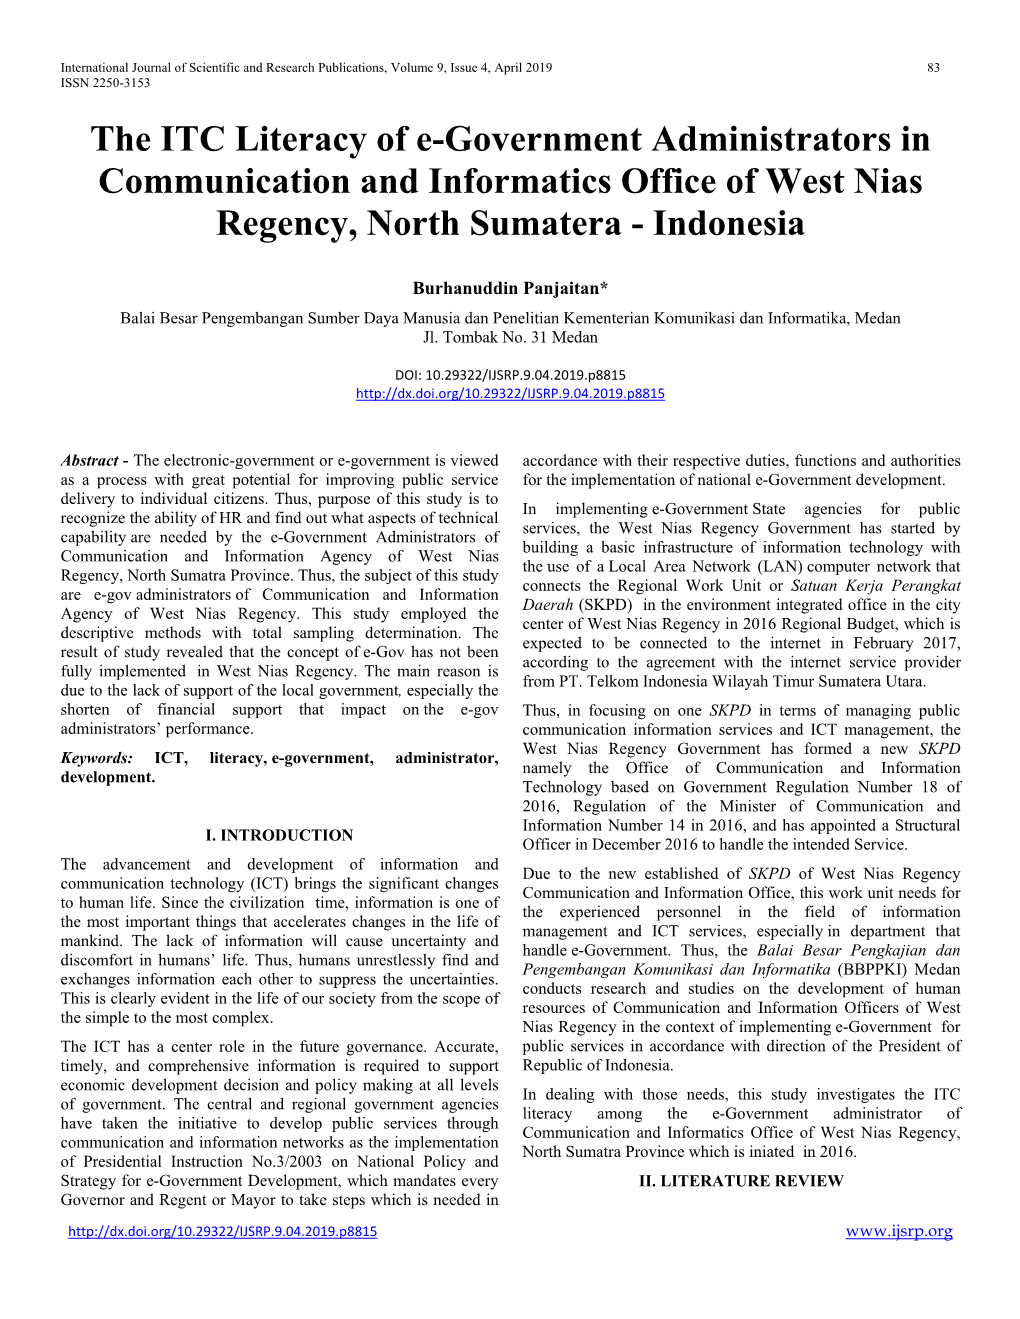 The ITC Literacy of E-Government Administrators in Communication and Informatics Office of West Nias Regency, North Sumatera - Indonesia